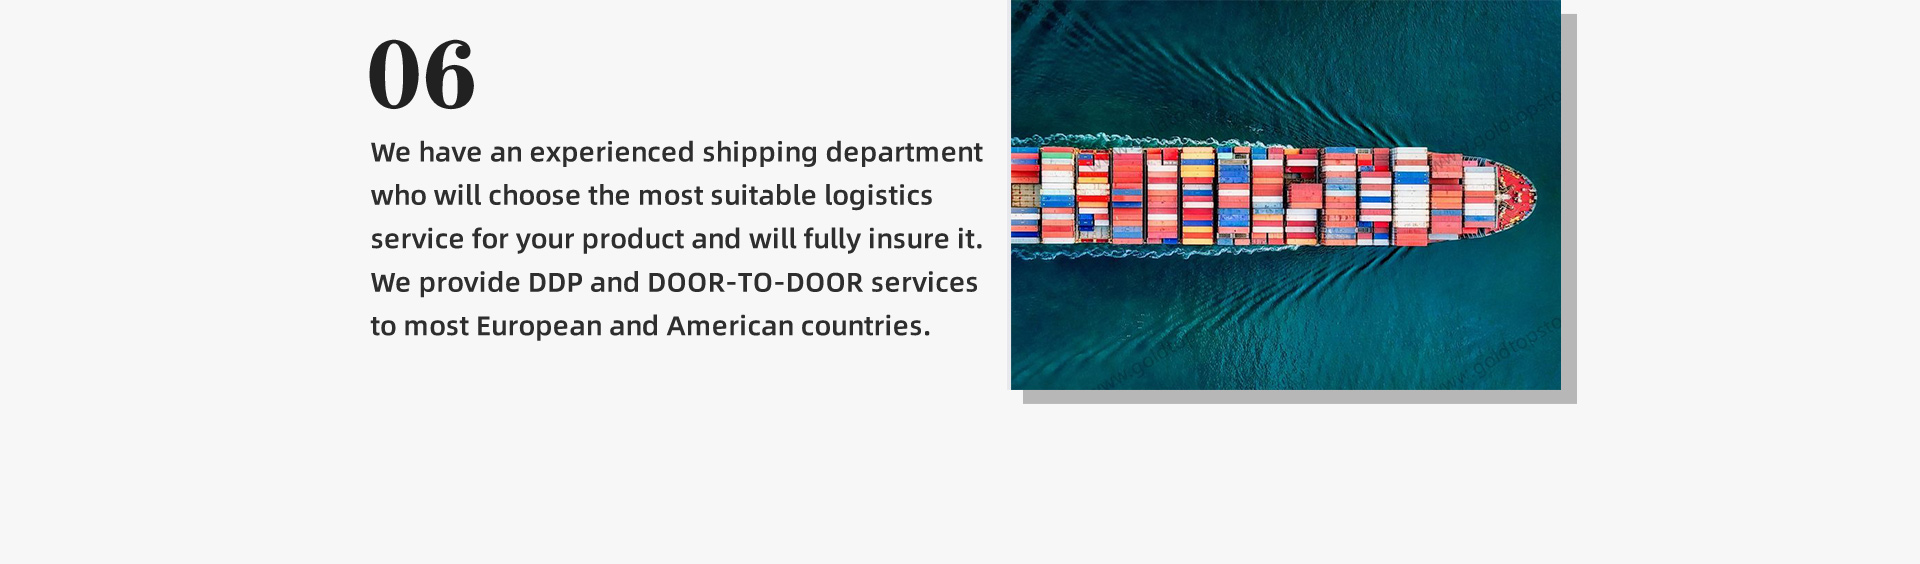 6.We have an experienced shipping department who will choose the most suitable logistics service for your product and will fully insure it. We provide DDP and DOOR-TO-DOOR services to most European and American countries